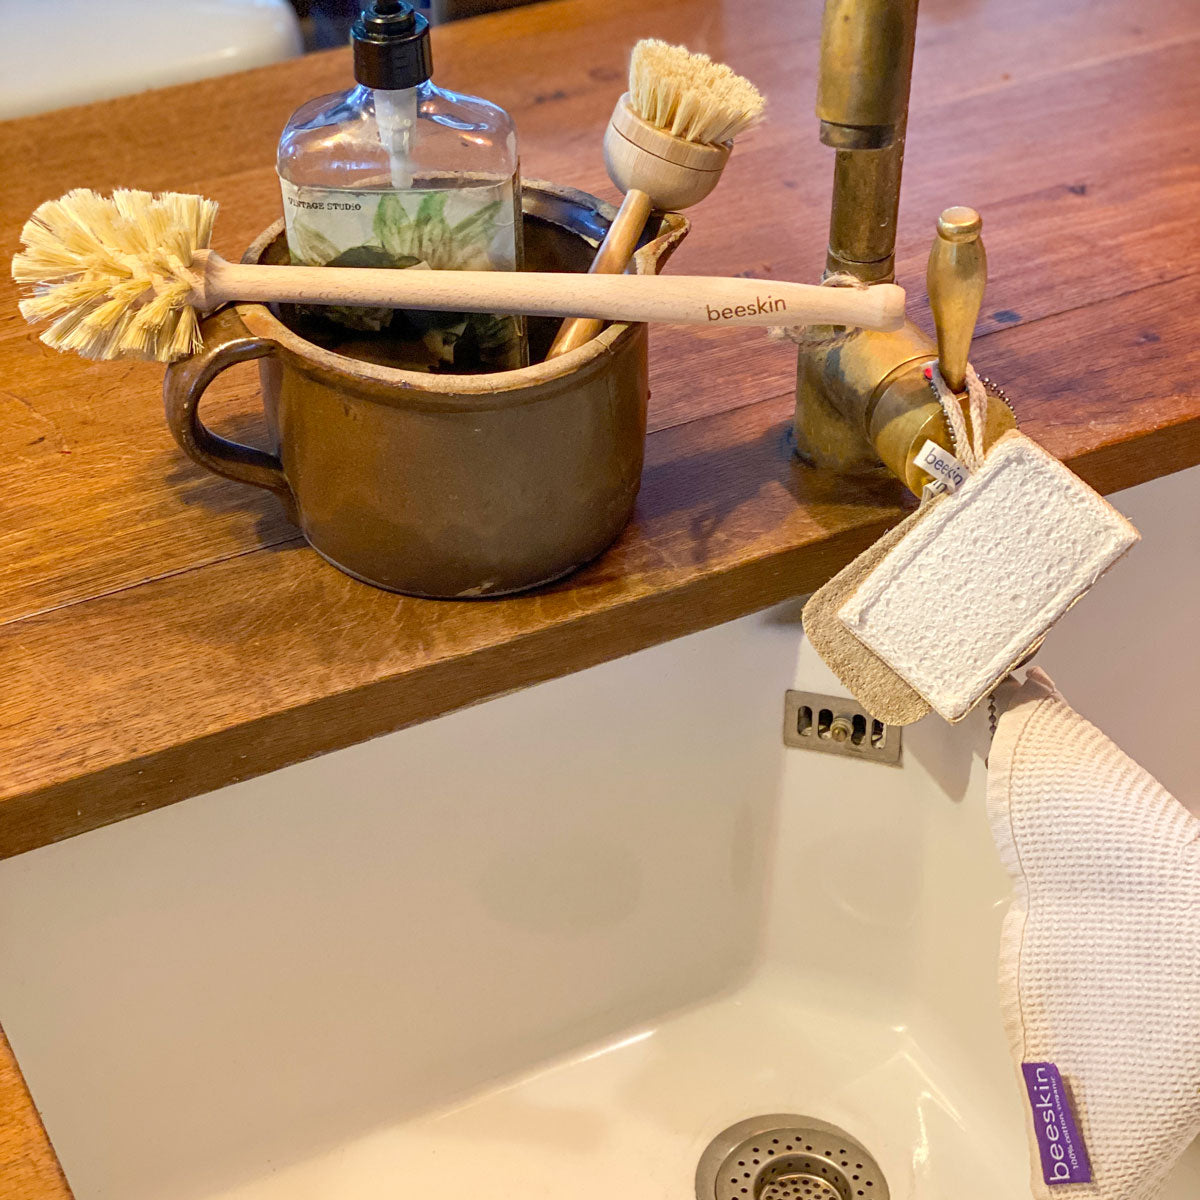 beeskin brushes and loofah placed at a white sink